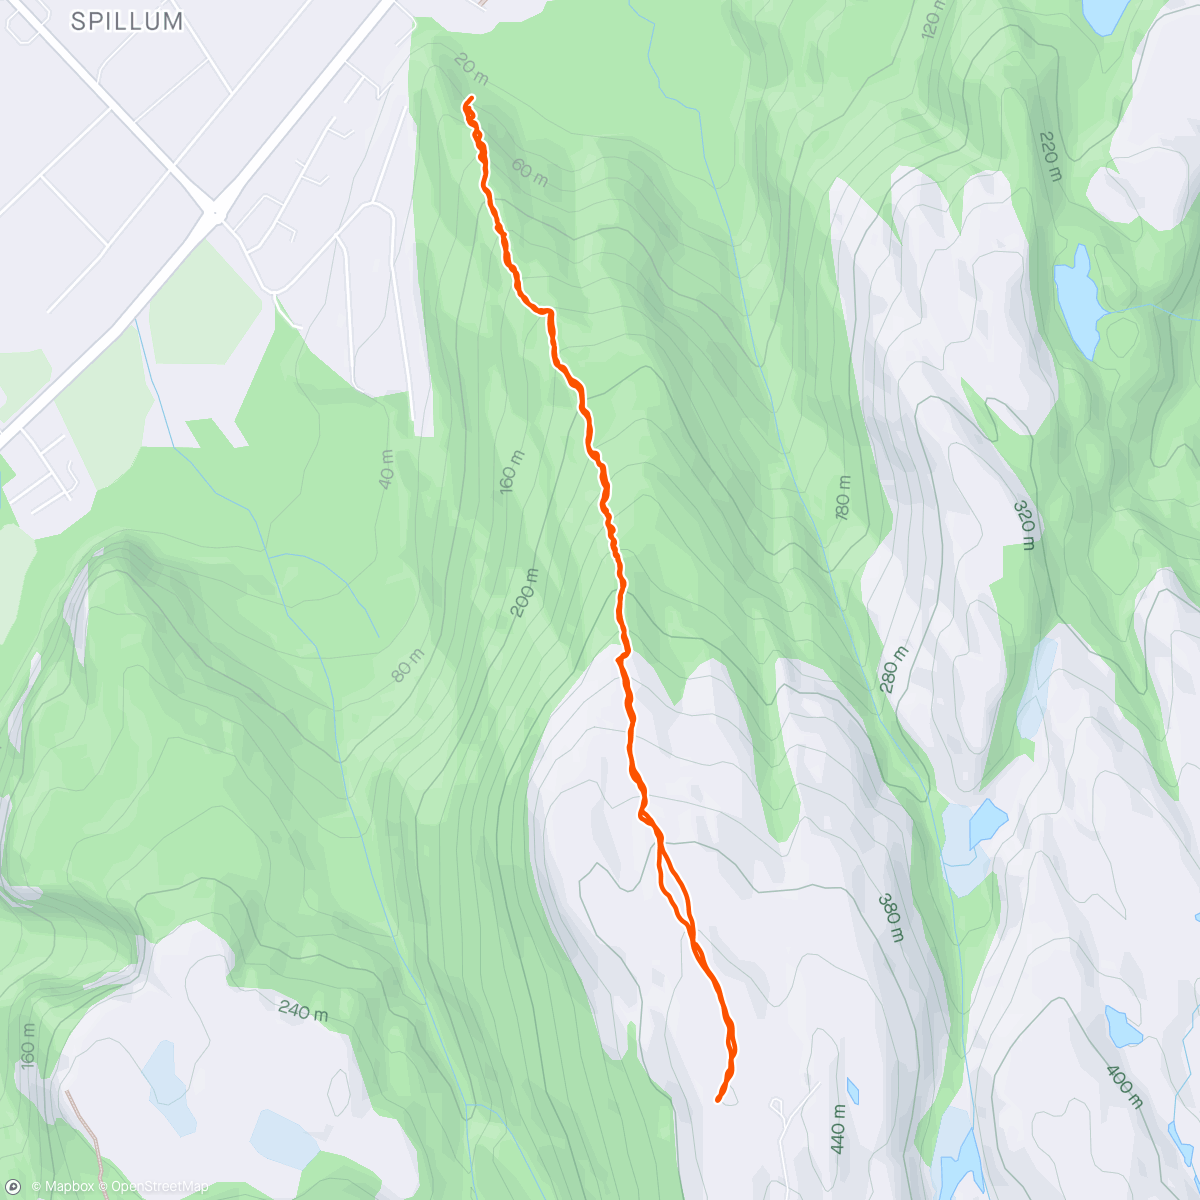 Map of the activity, Spillumsfjellet